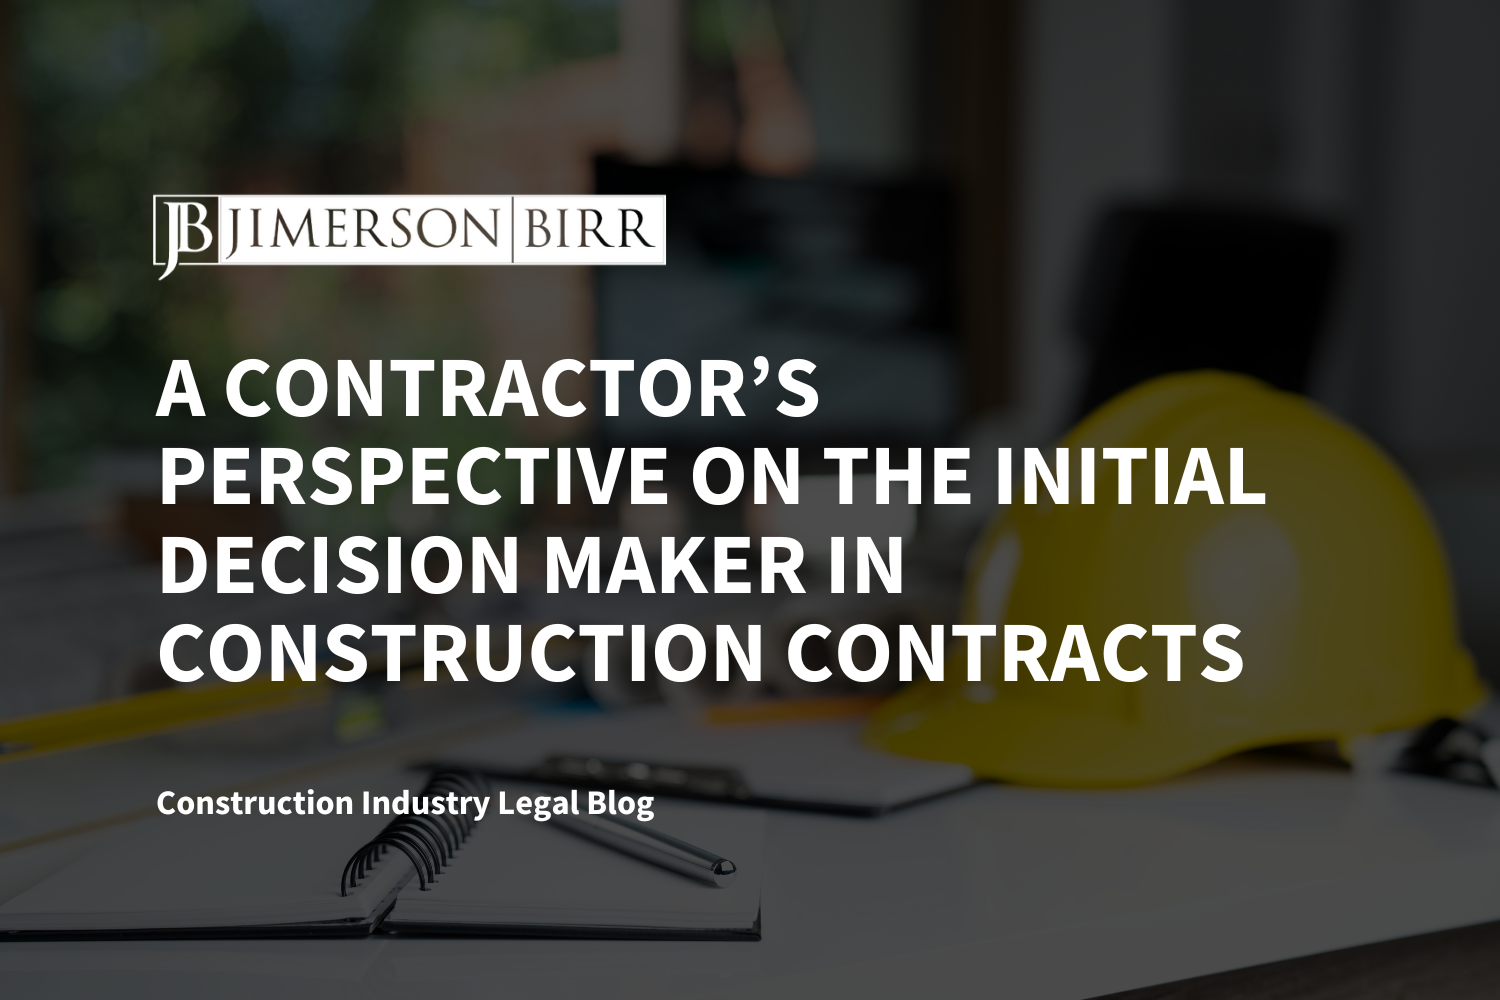 A Contractor’s Perspective on the Initial Decision Maker in Construction Contracts